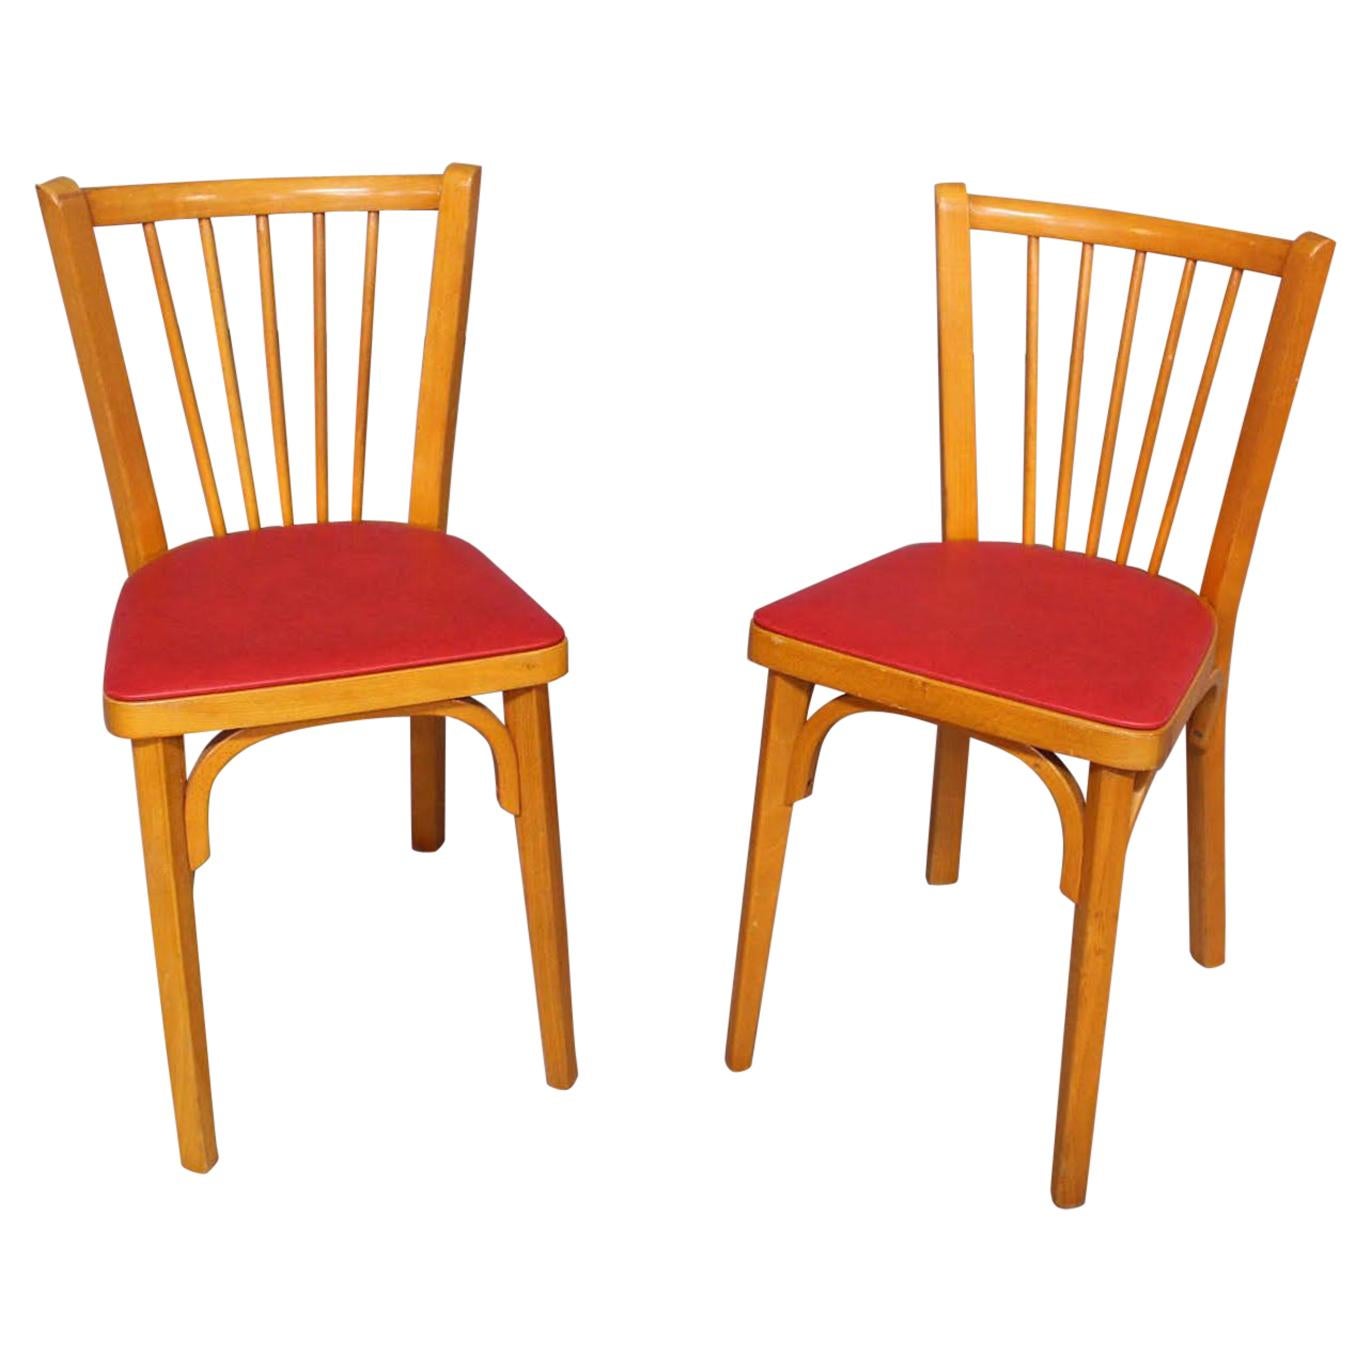 Pair of Bistro Dining Chairs Baumann France Midcentury, circa 1950 For Sale